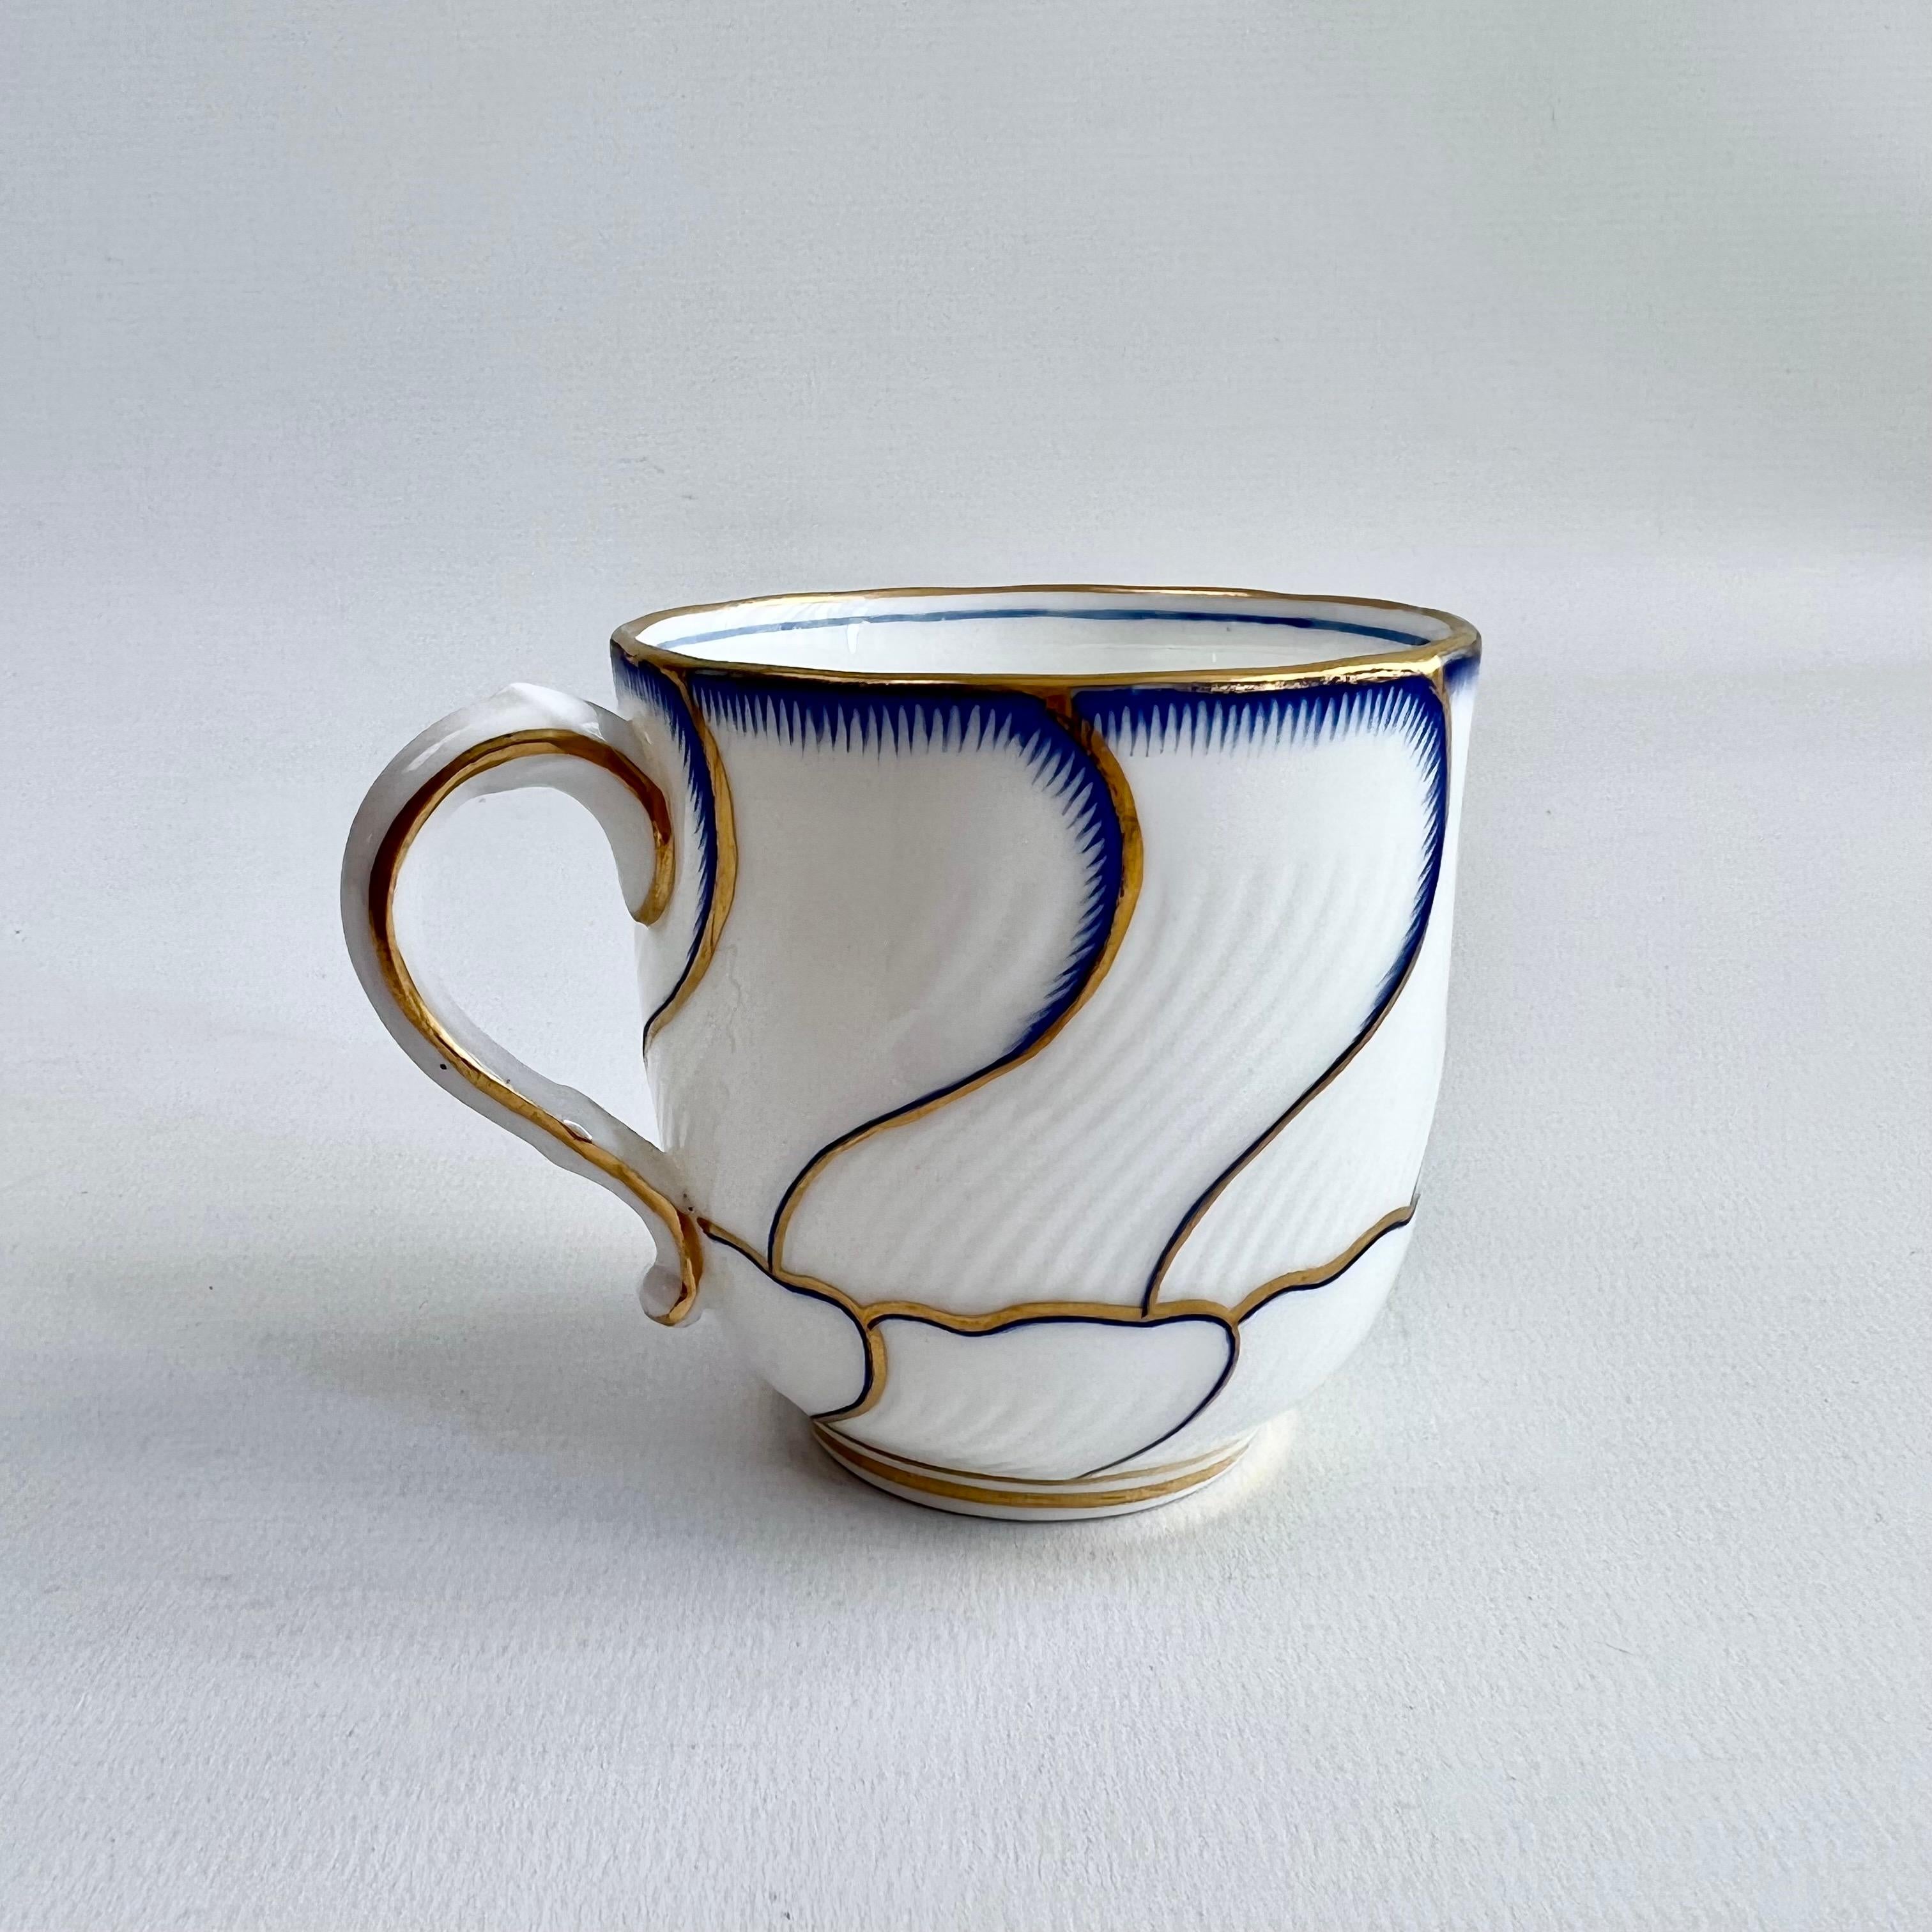 Hand-Painted Minton Orphaned Coffee Cup, Spiral Fluted with Blue and Gilt, Victorian ca 1881